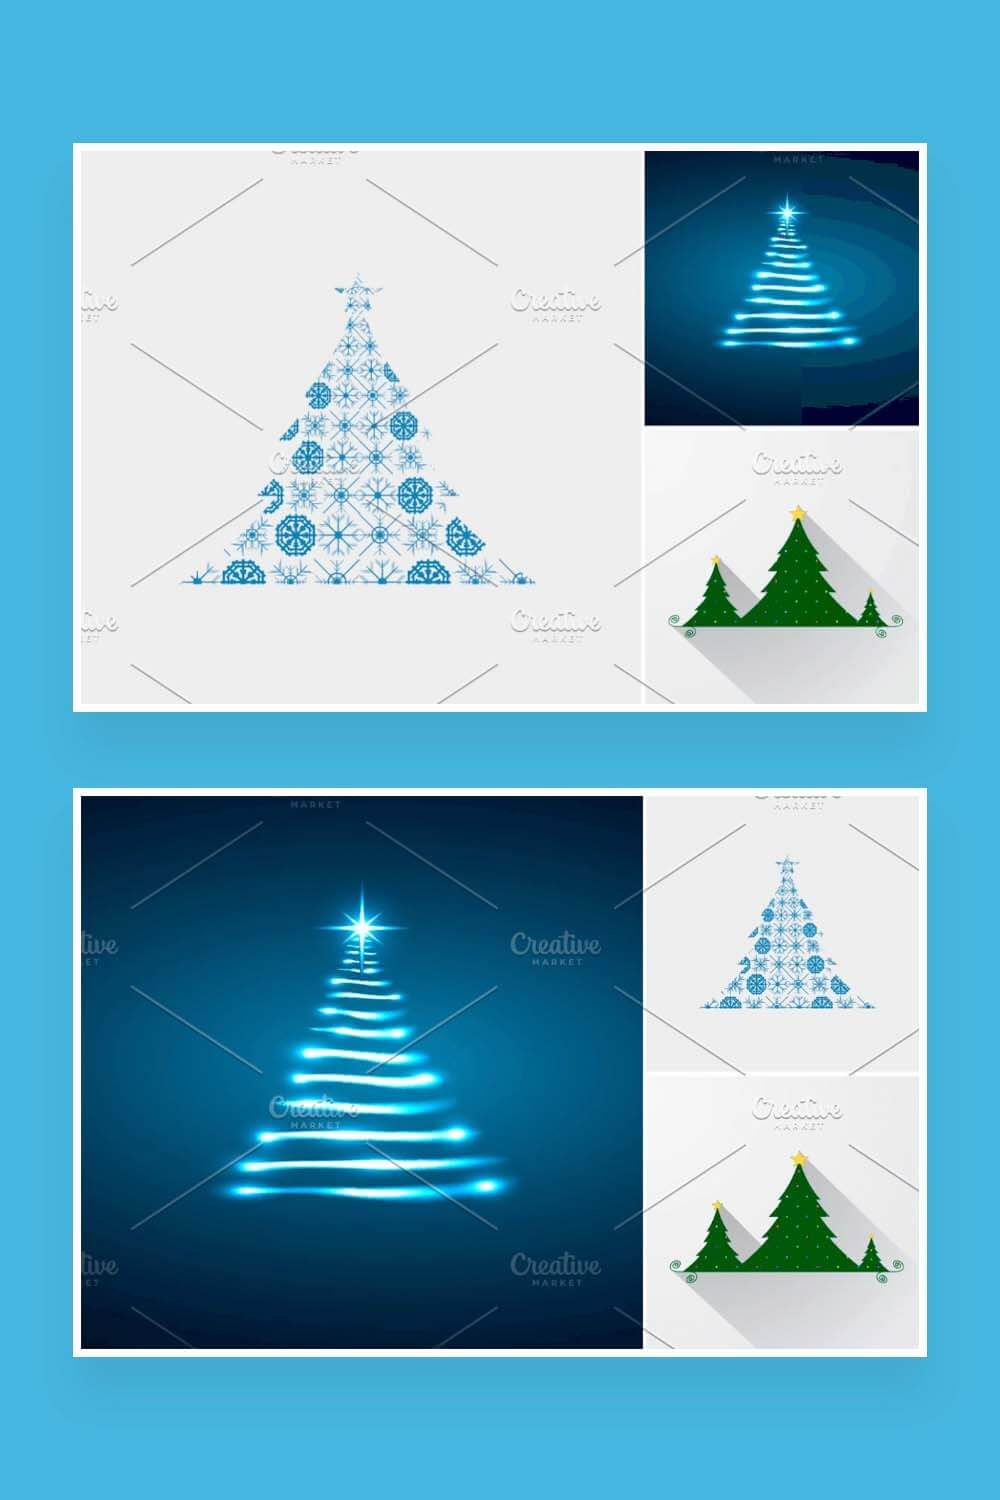 Two pictures with a collection of Christmas trees in light and blue shades.